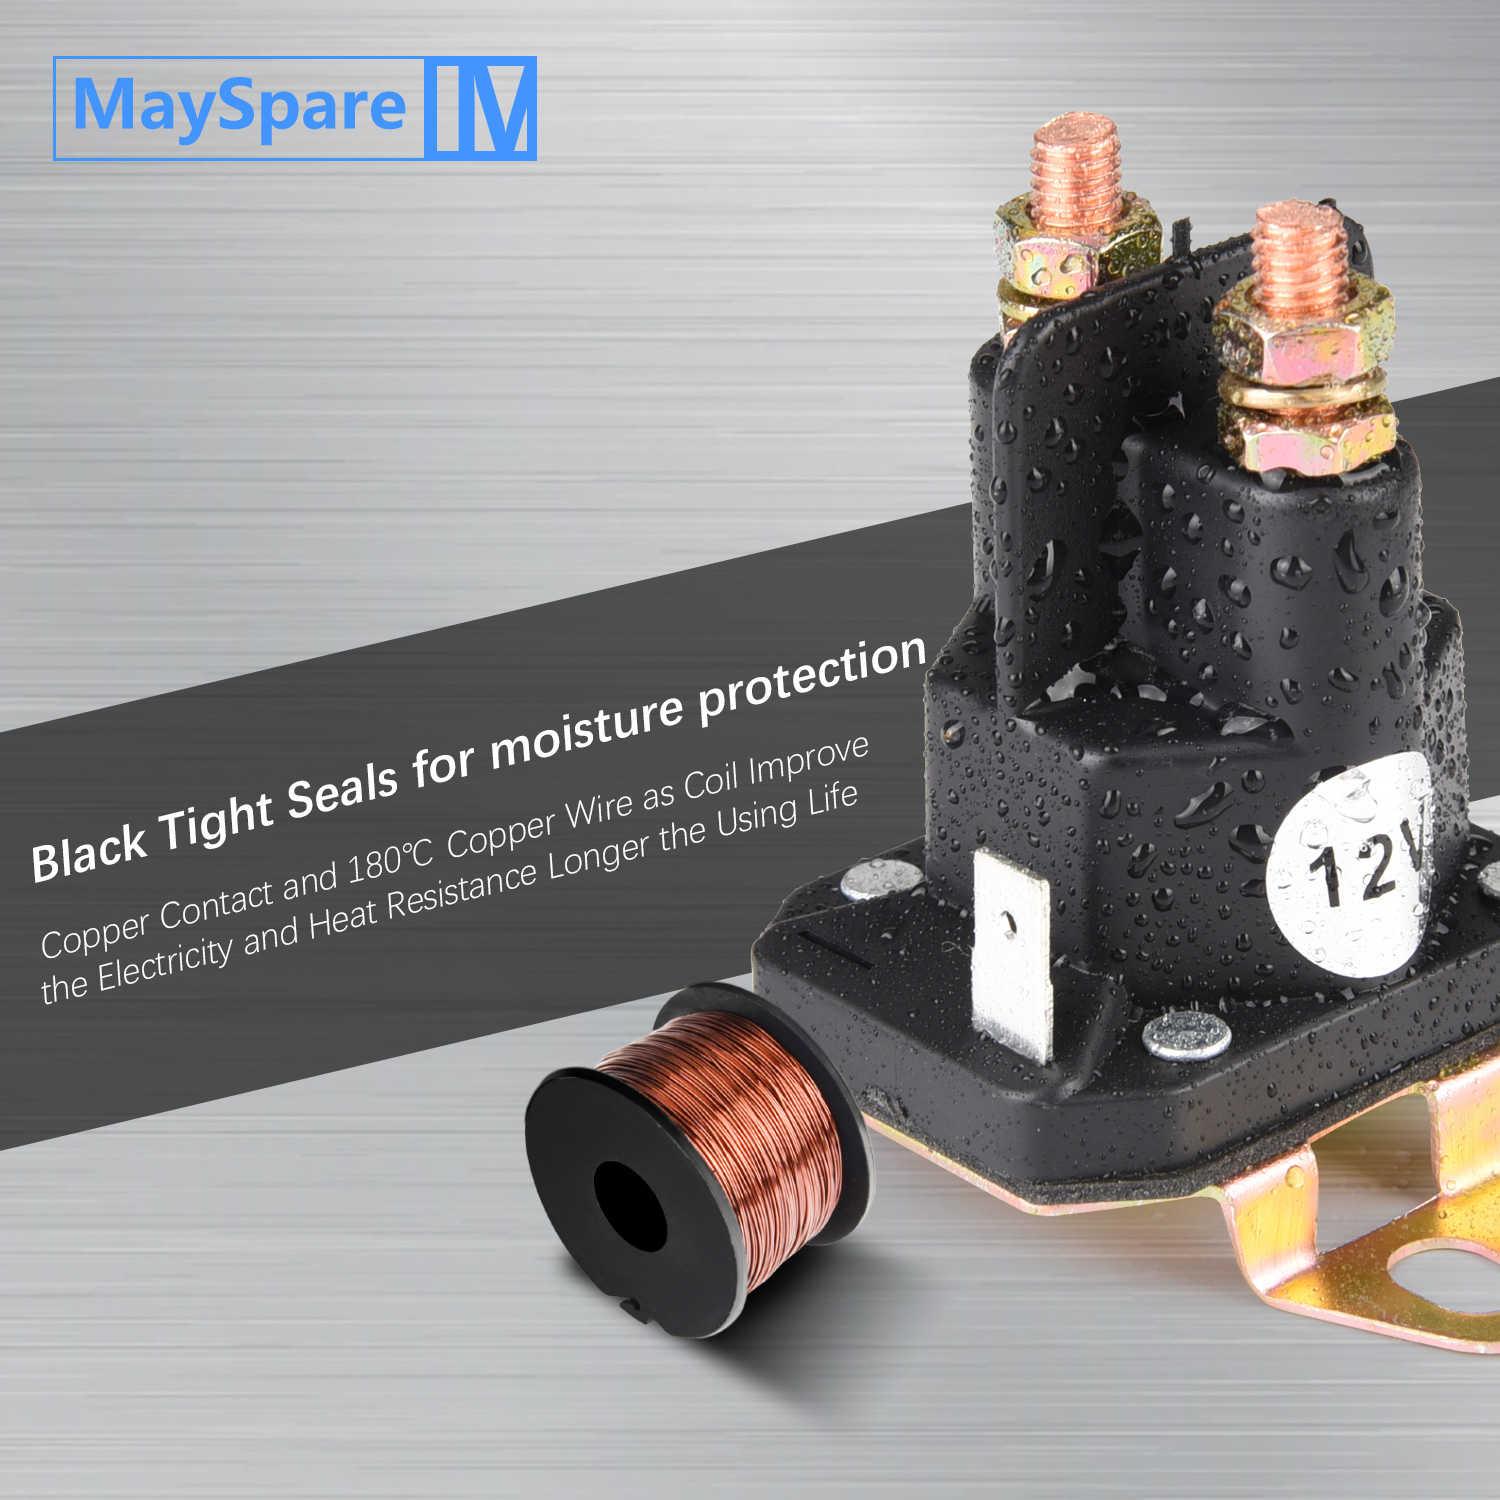 XR-2179 12V starter Solenoid Made of High Quality Copper Wire